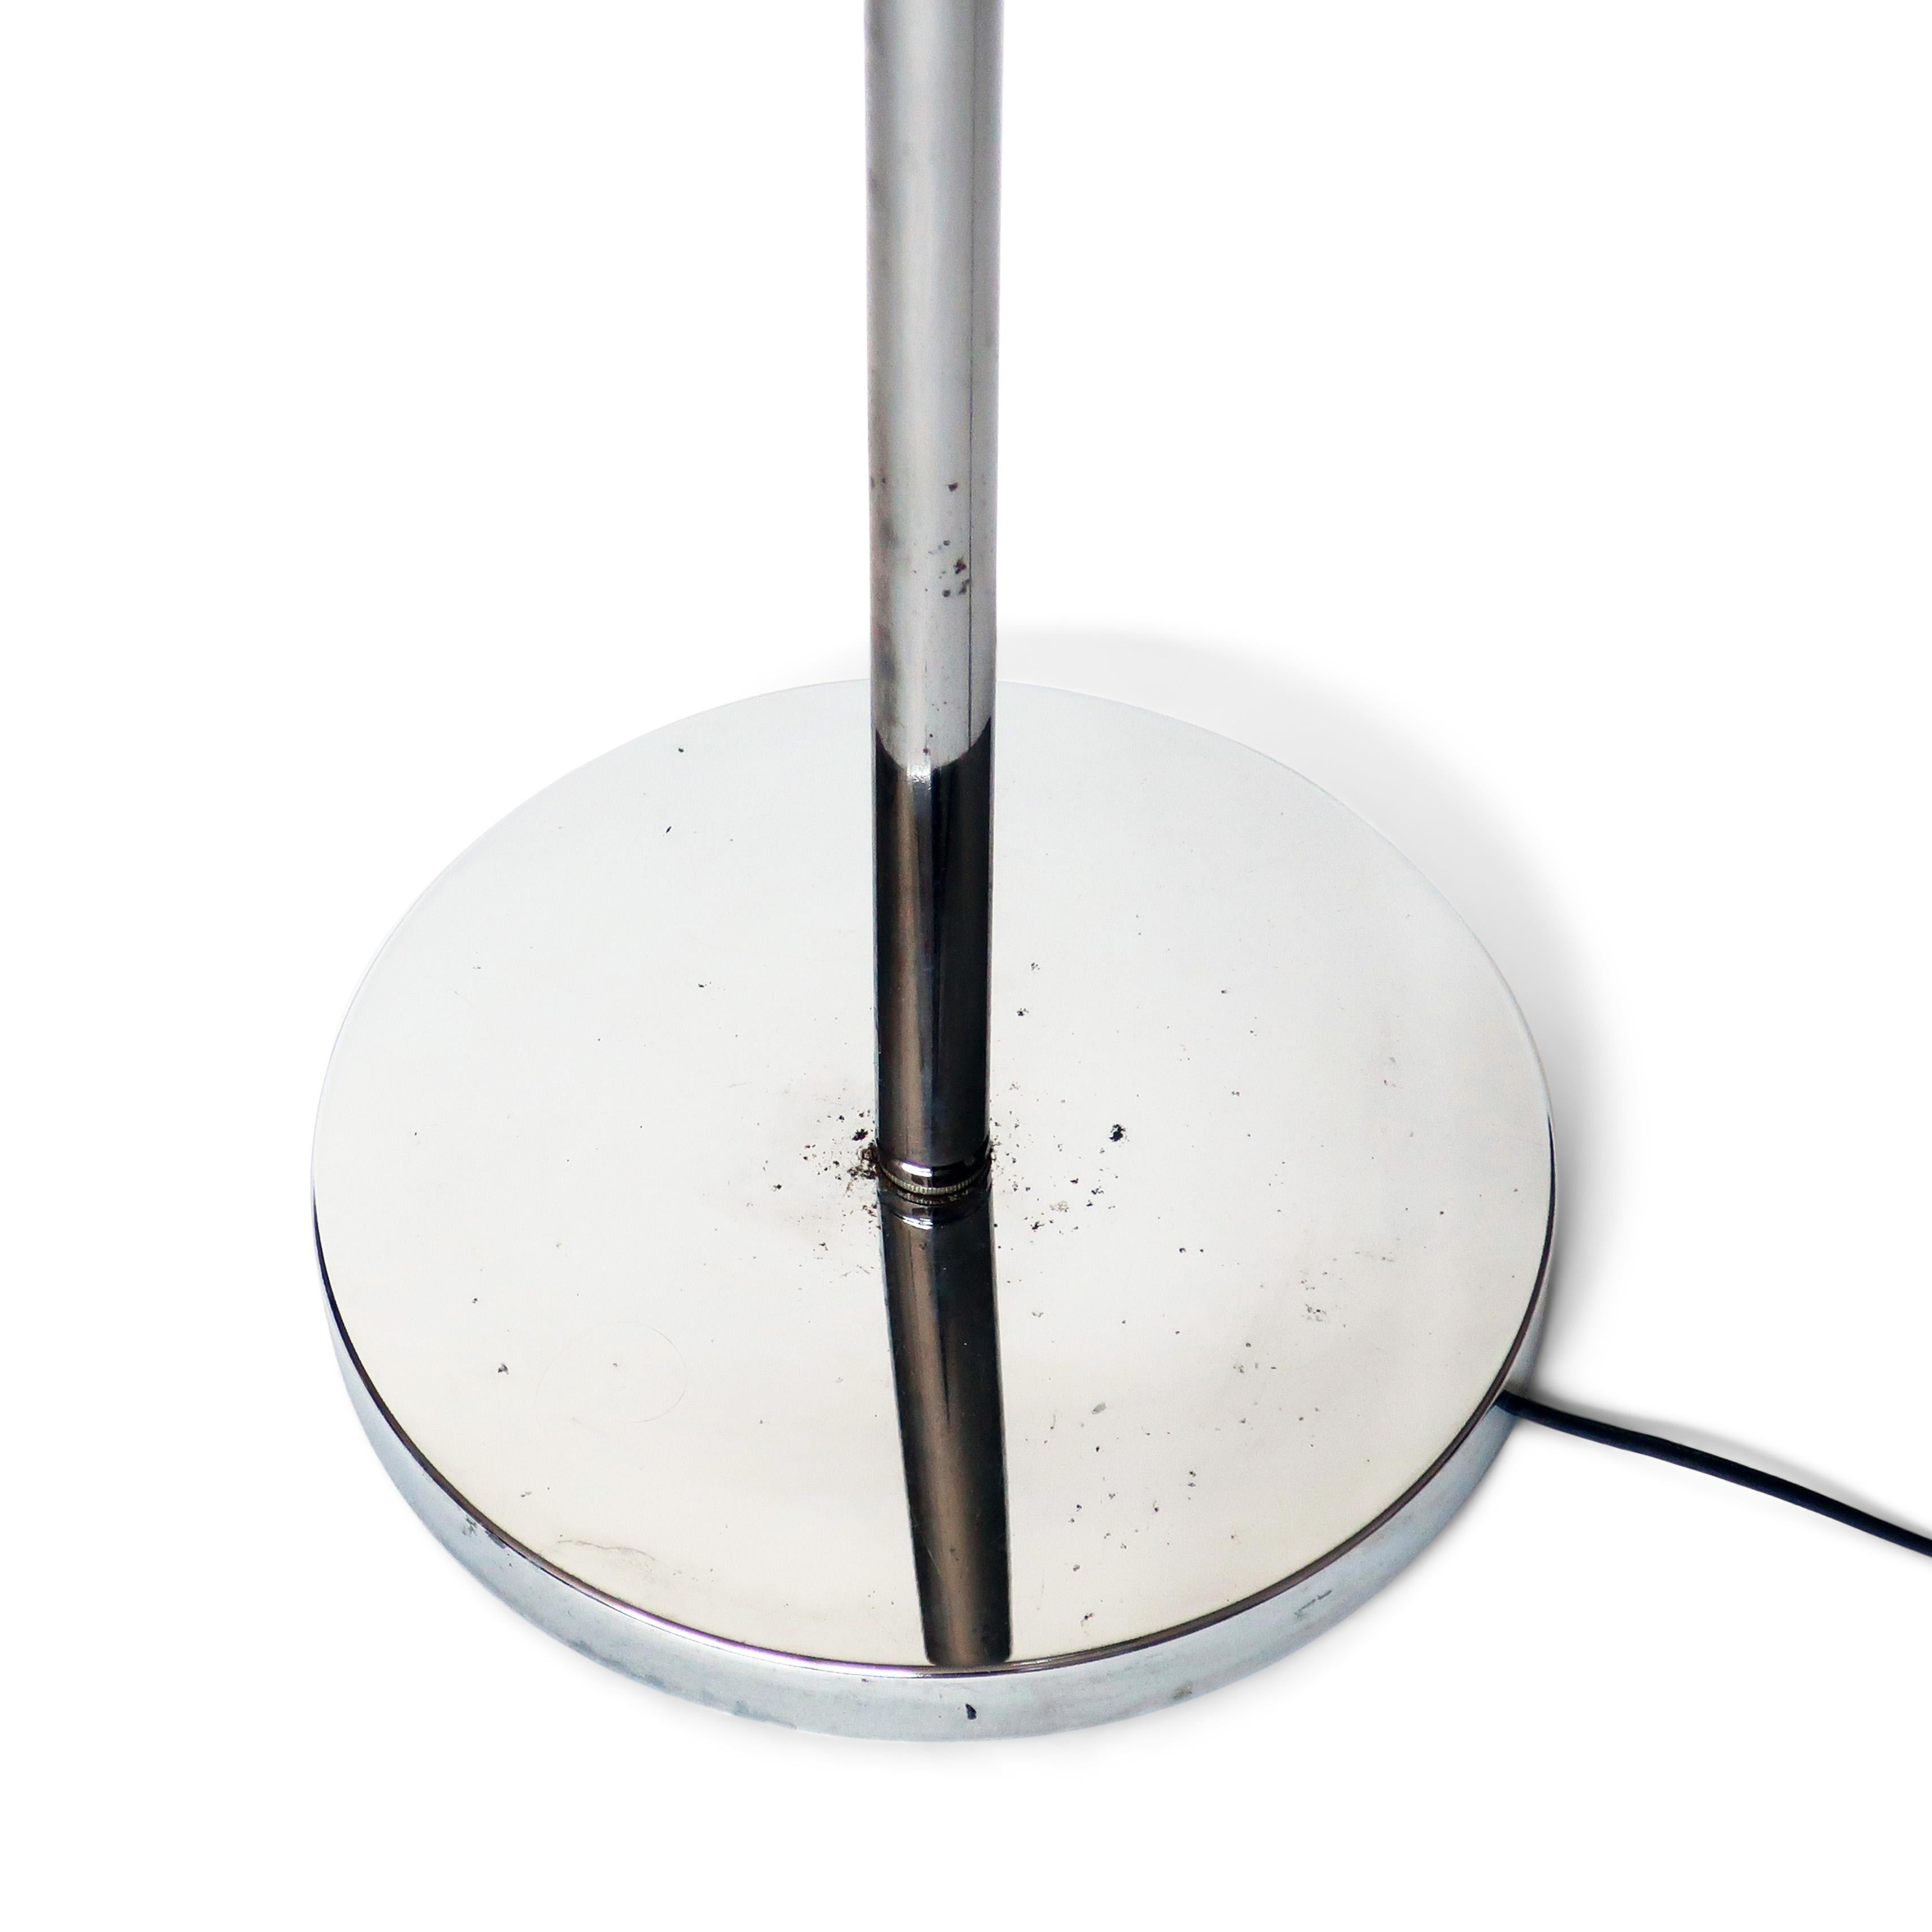 A vintage Mid-Century Modern chrome eyeball floor lamp in the style of Robert Sonneman/George Kovacs or Koch & Lowy, circa 1960s-1970s. It features three adjustable chrome globe lights on a central chrome stem and round chrome base. 

In vintage